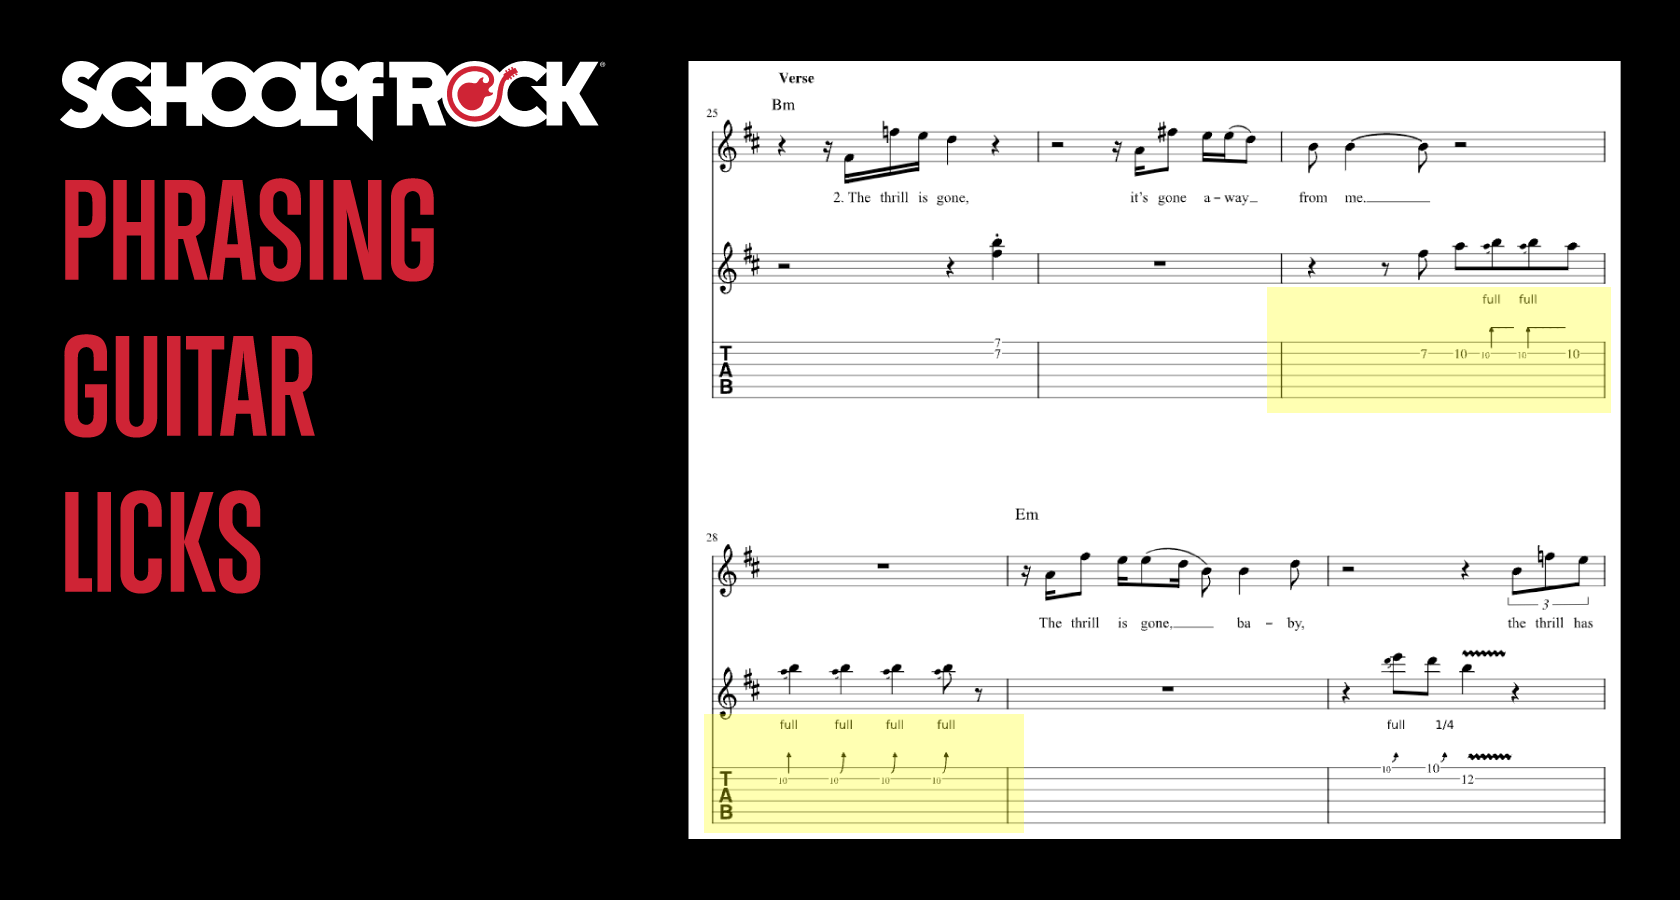 An example of phrasing guitar licks from B.B. King's 